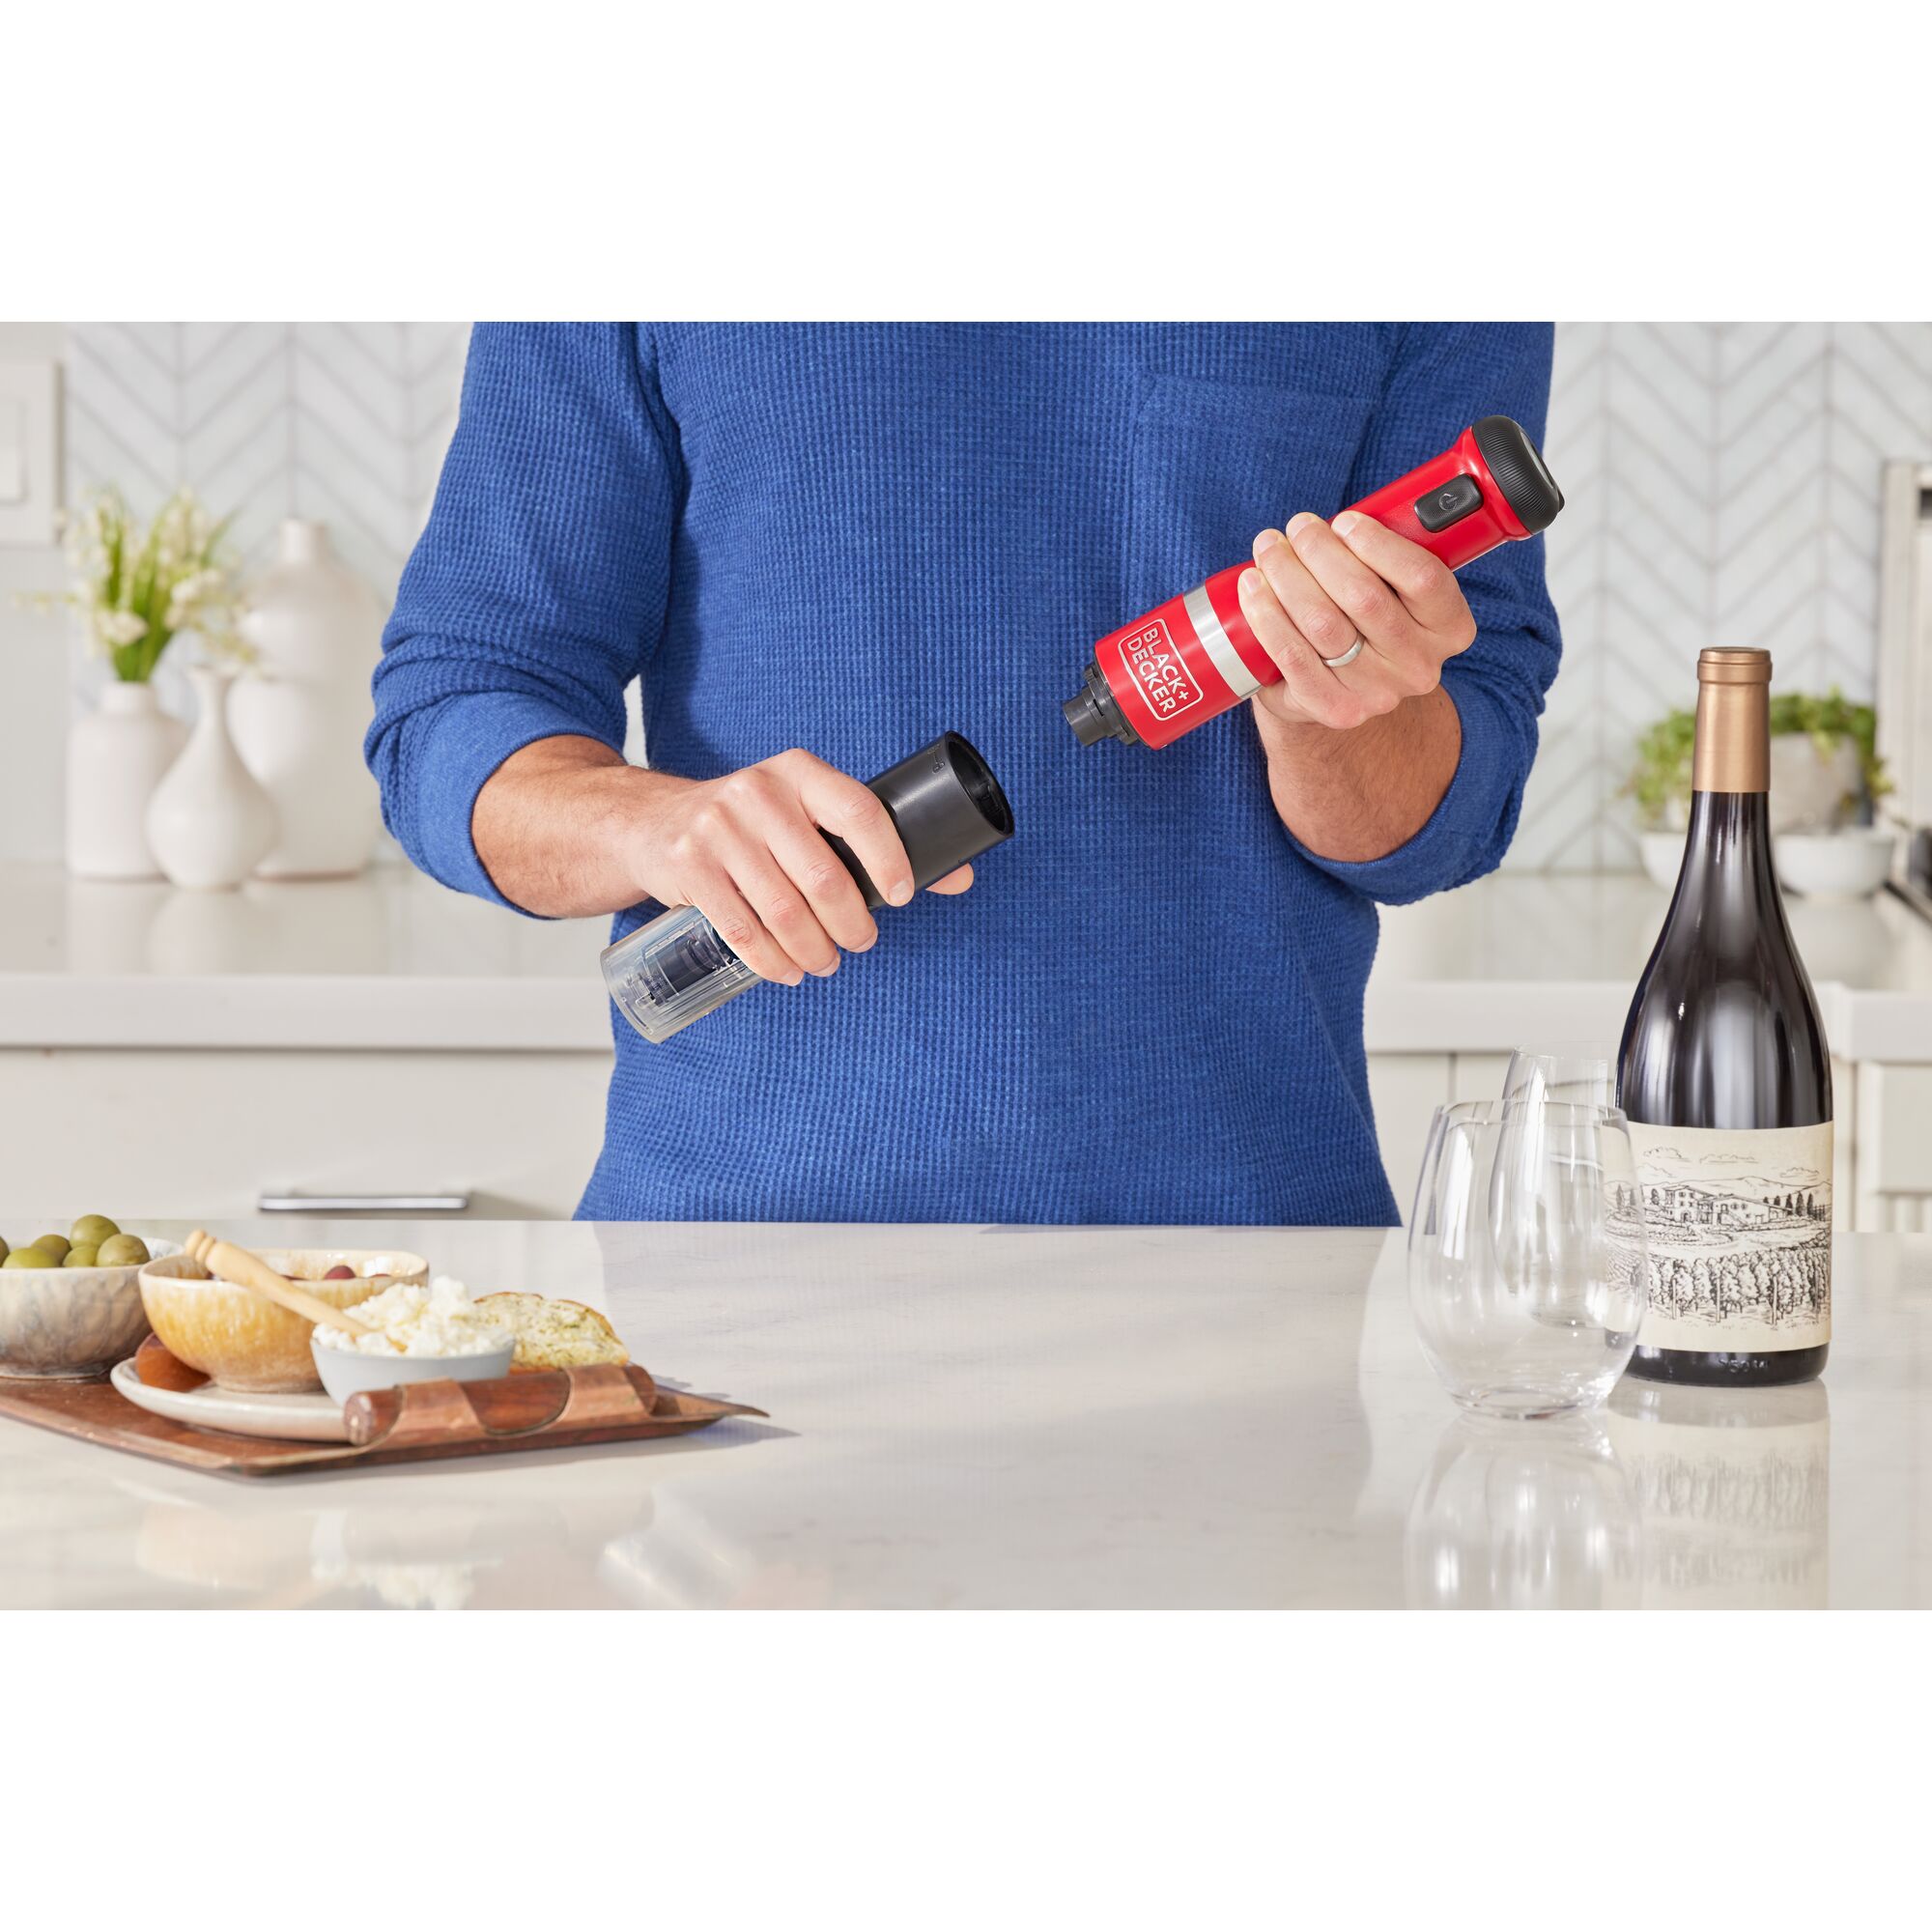 Talent showing how to attach the BLACK+DECKER kitchen wand wine opener attachment to the red power unit